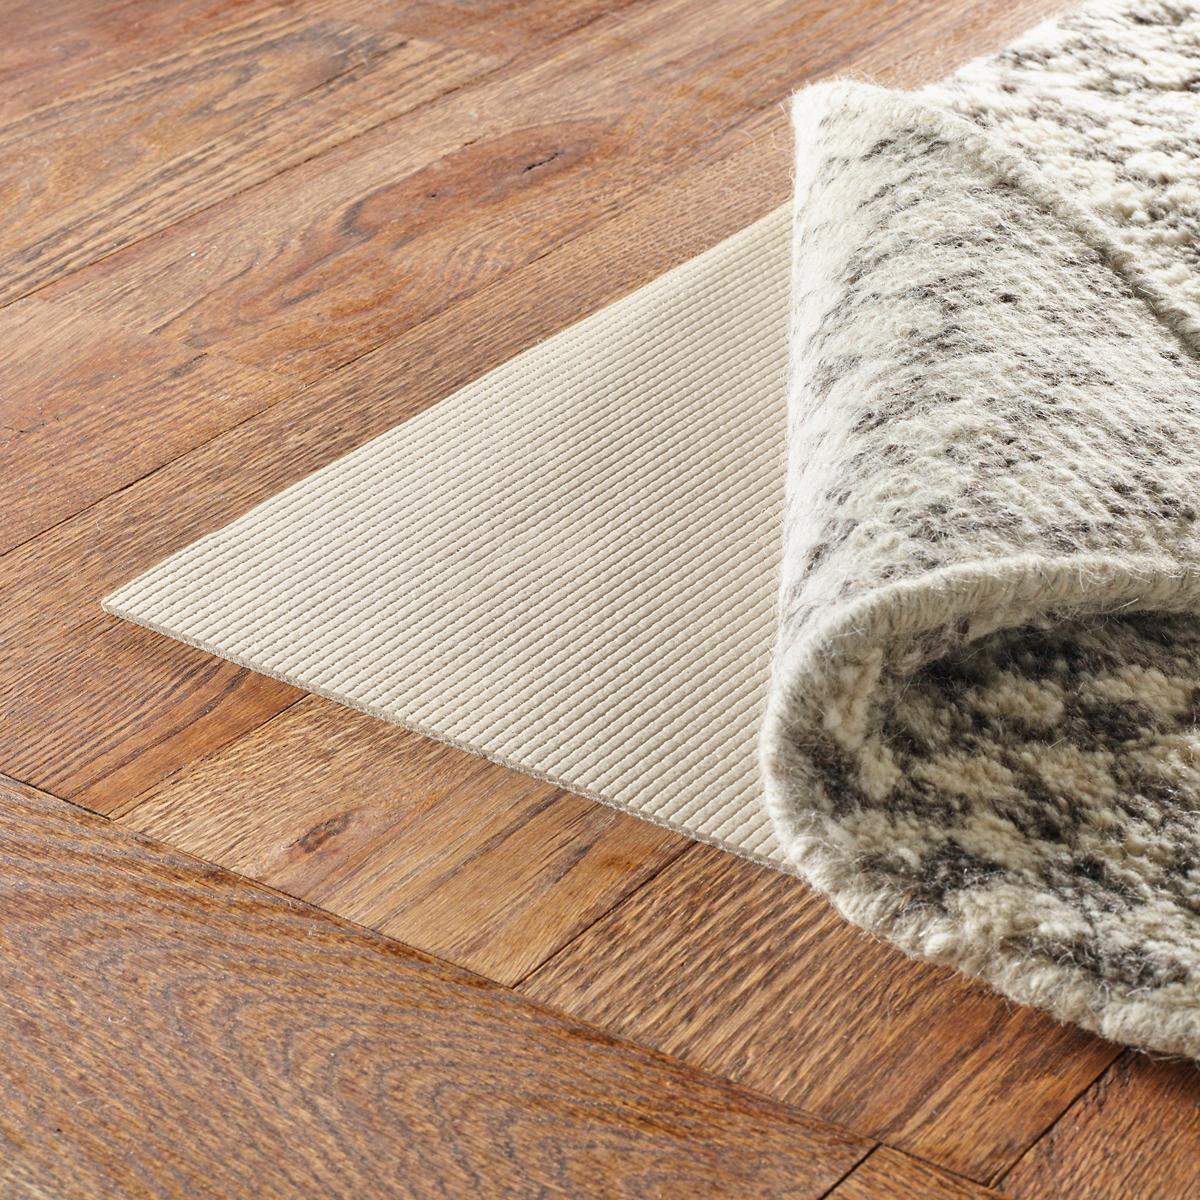 Solid Extra Grip Rug Pad Dash Albert, Are Pvc Rug Pads Safe For Hardwood Floors